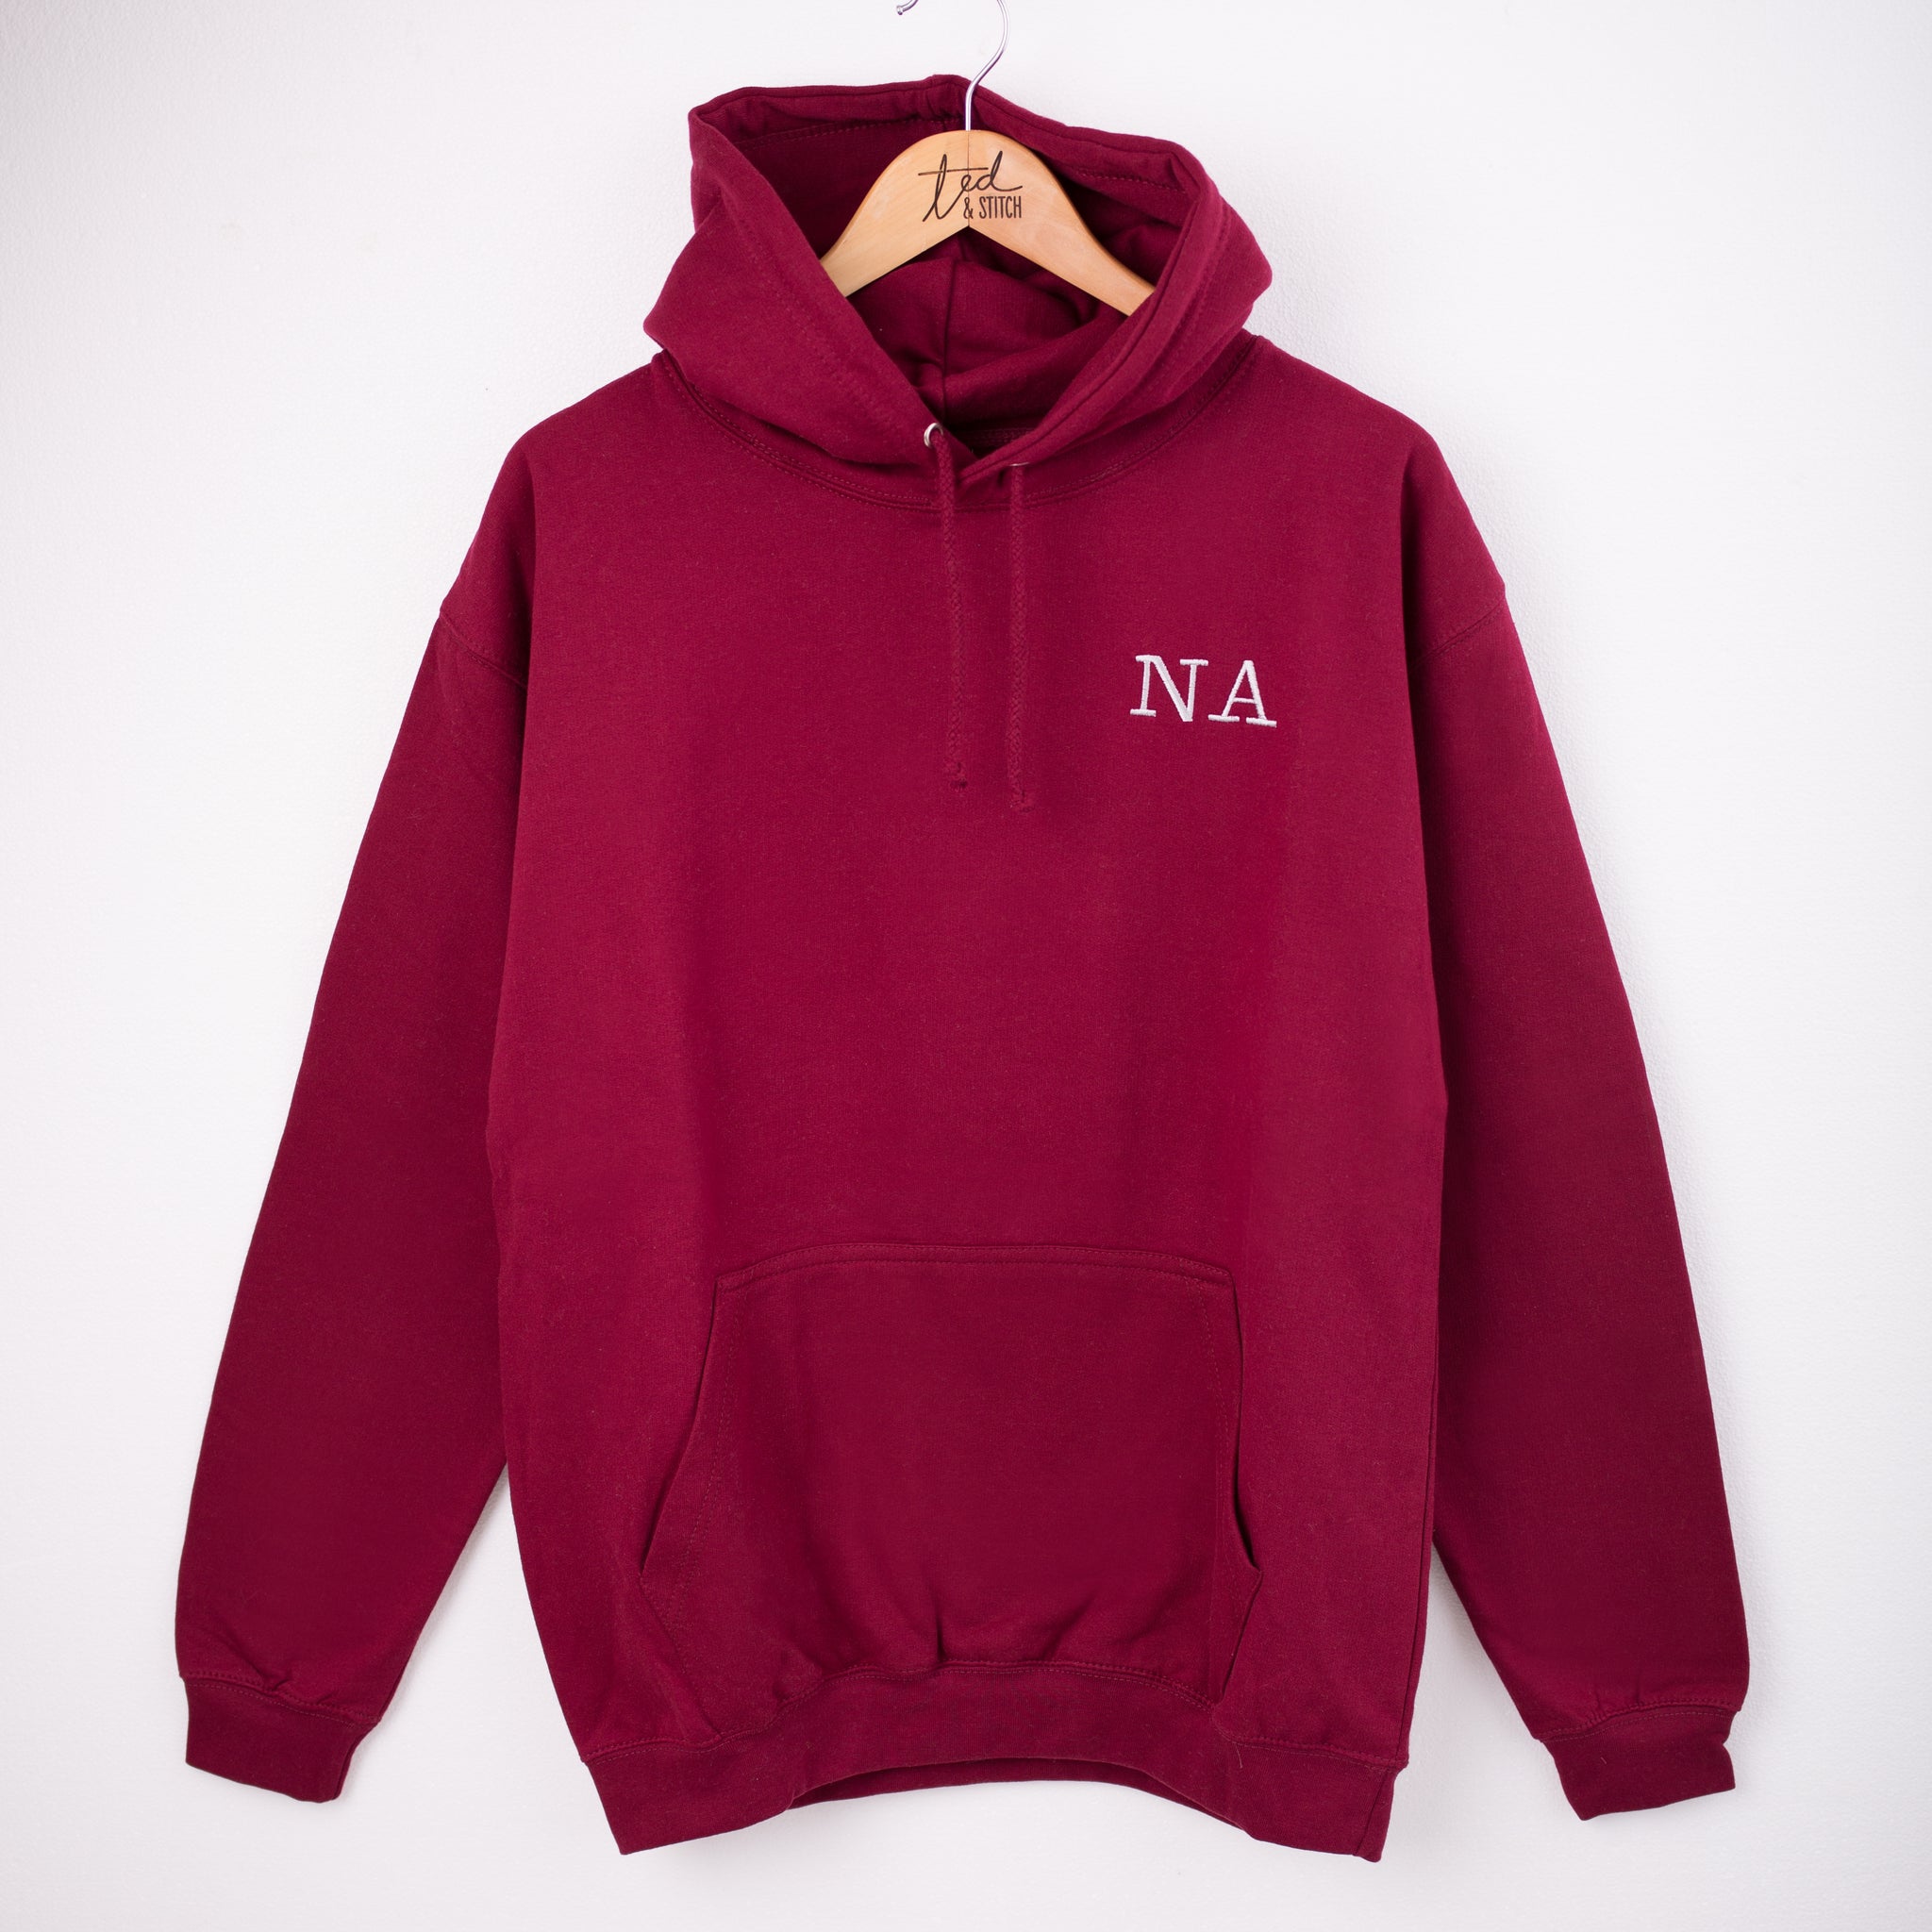 Adult Monogrammed Hoodie On Hanger | Ted & Stitch